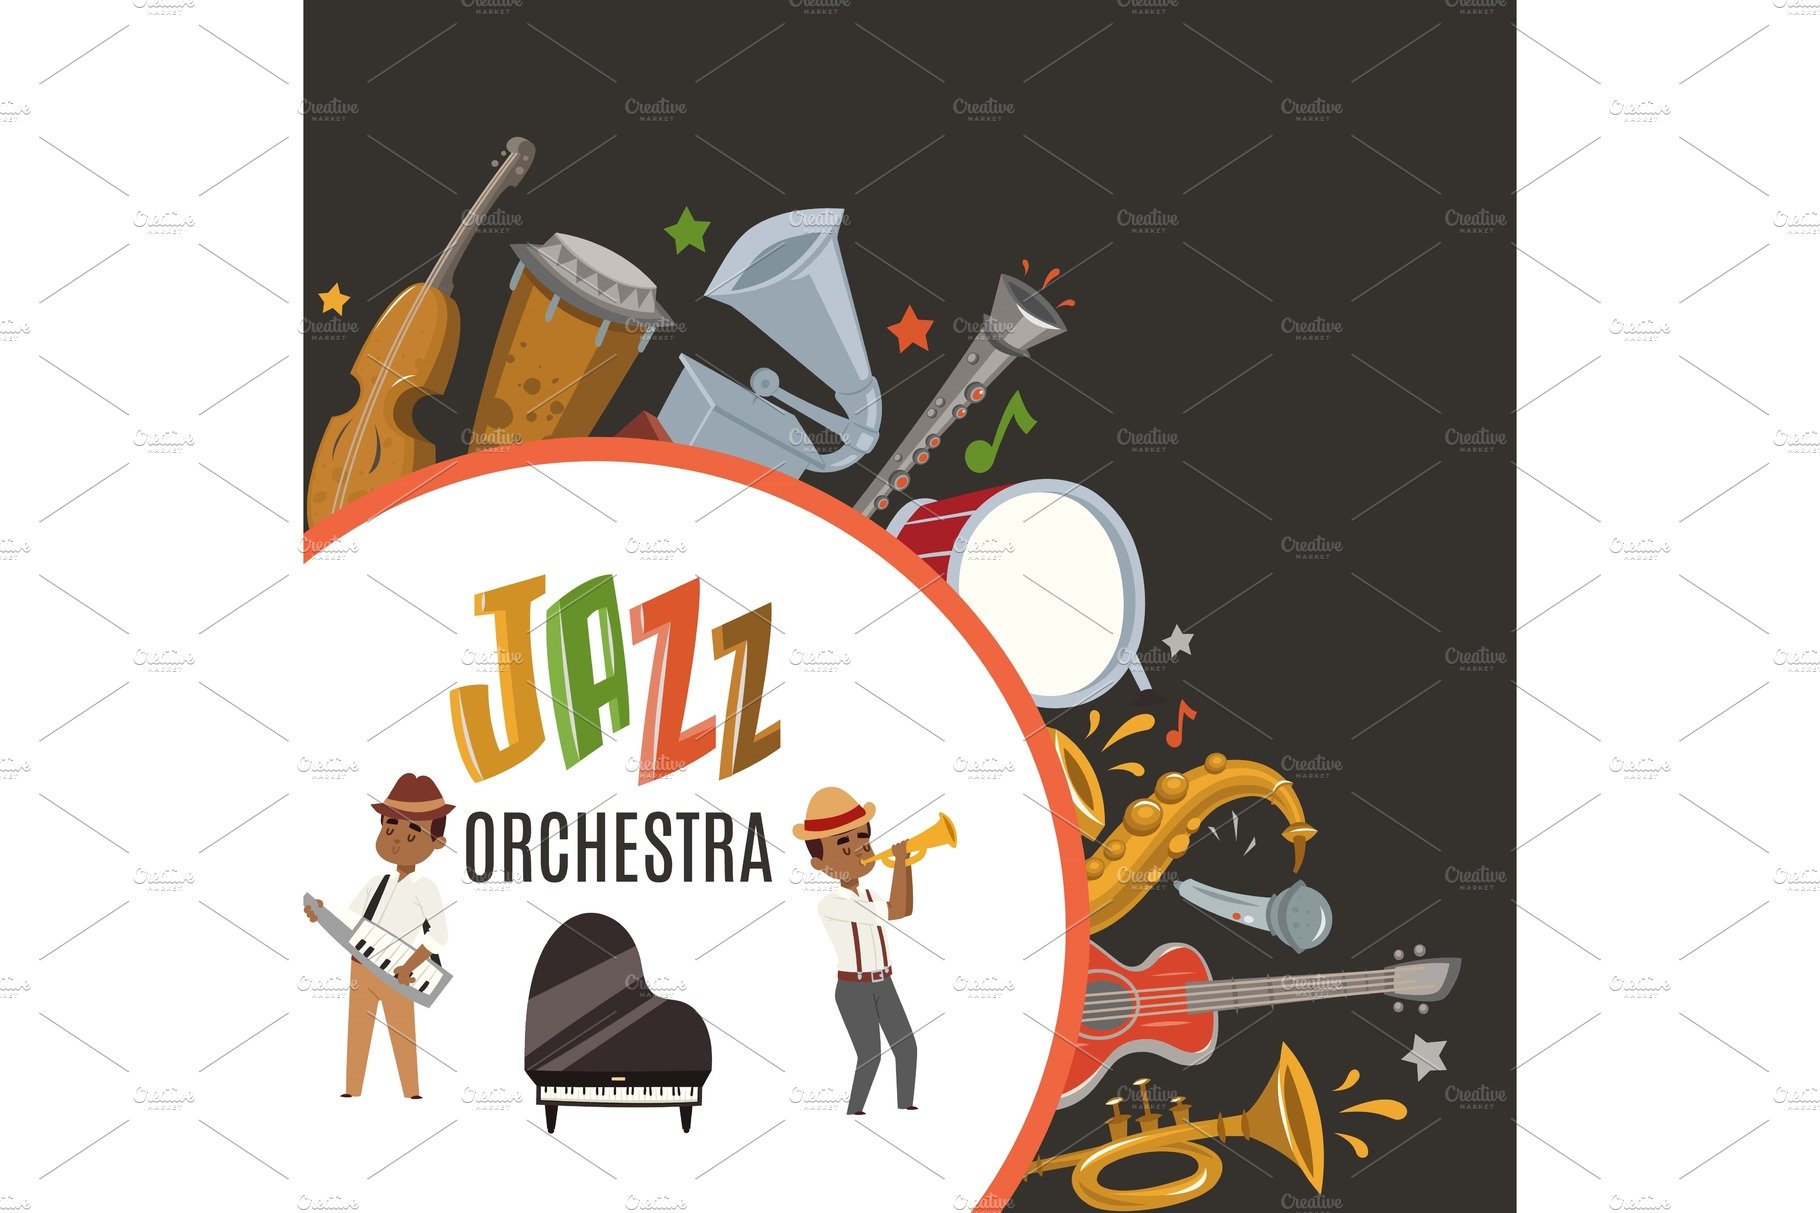 Jazz orchestra or jazzband with cover image.